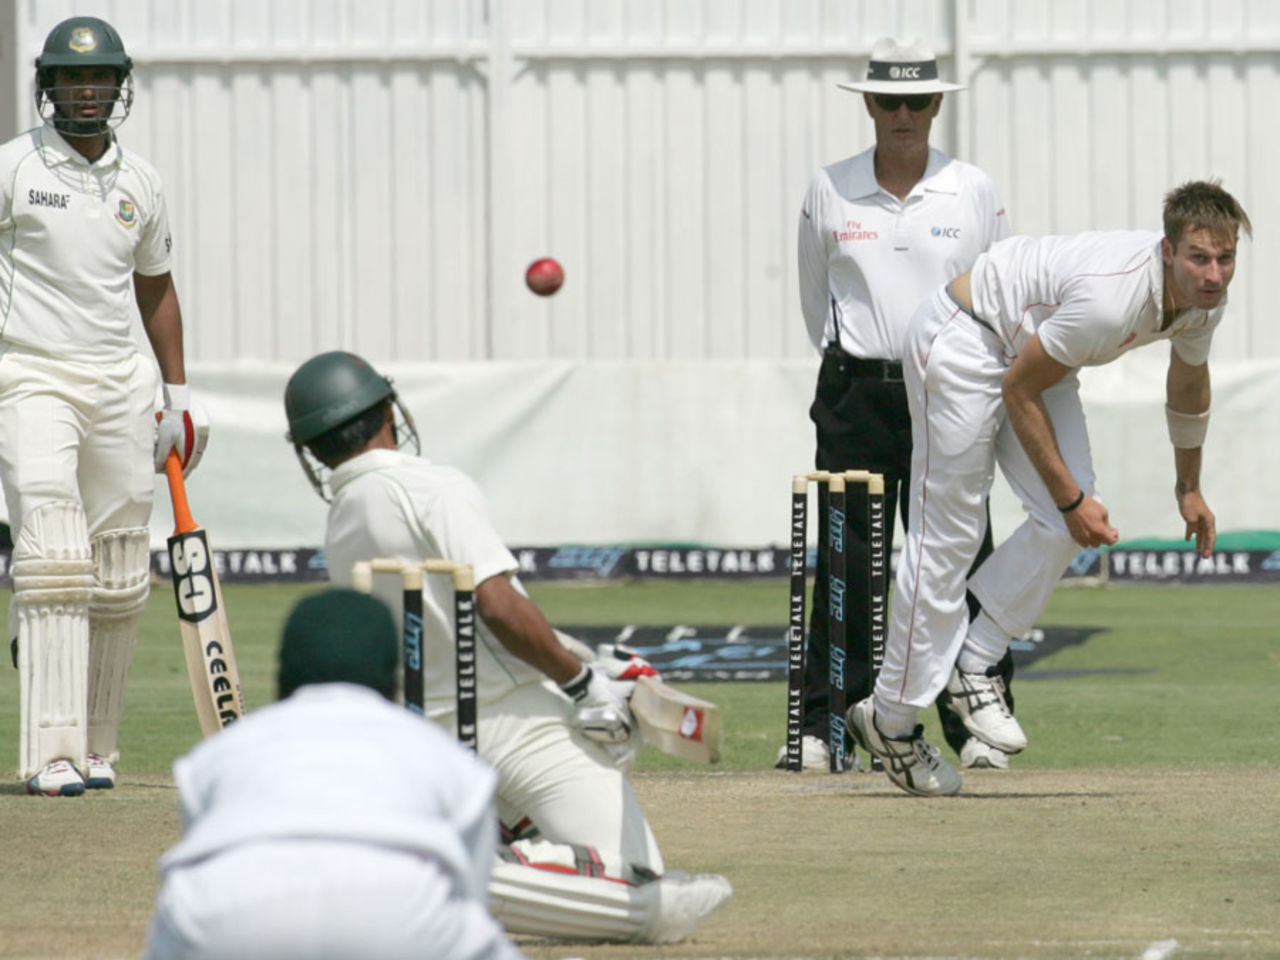 Mohammad Ashraful weaves out of the way of a Kyle Jarvis bouncer, Zimbabwe v Bangladesh, 1st Test, 4th day, Harare, April 20, 2013